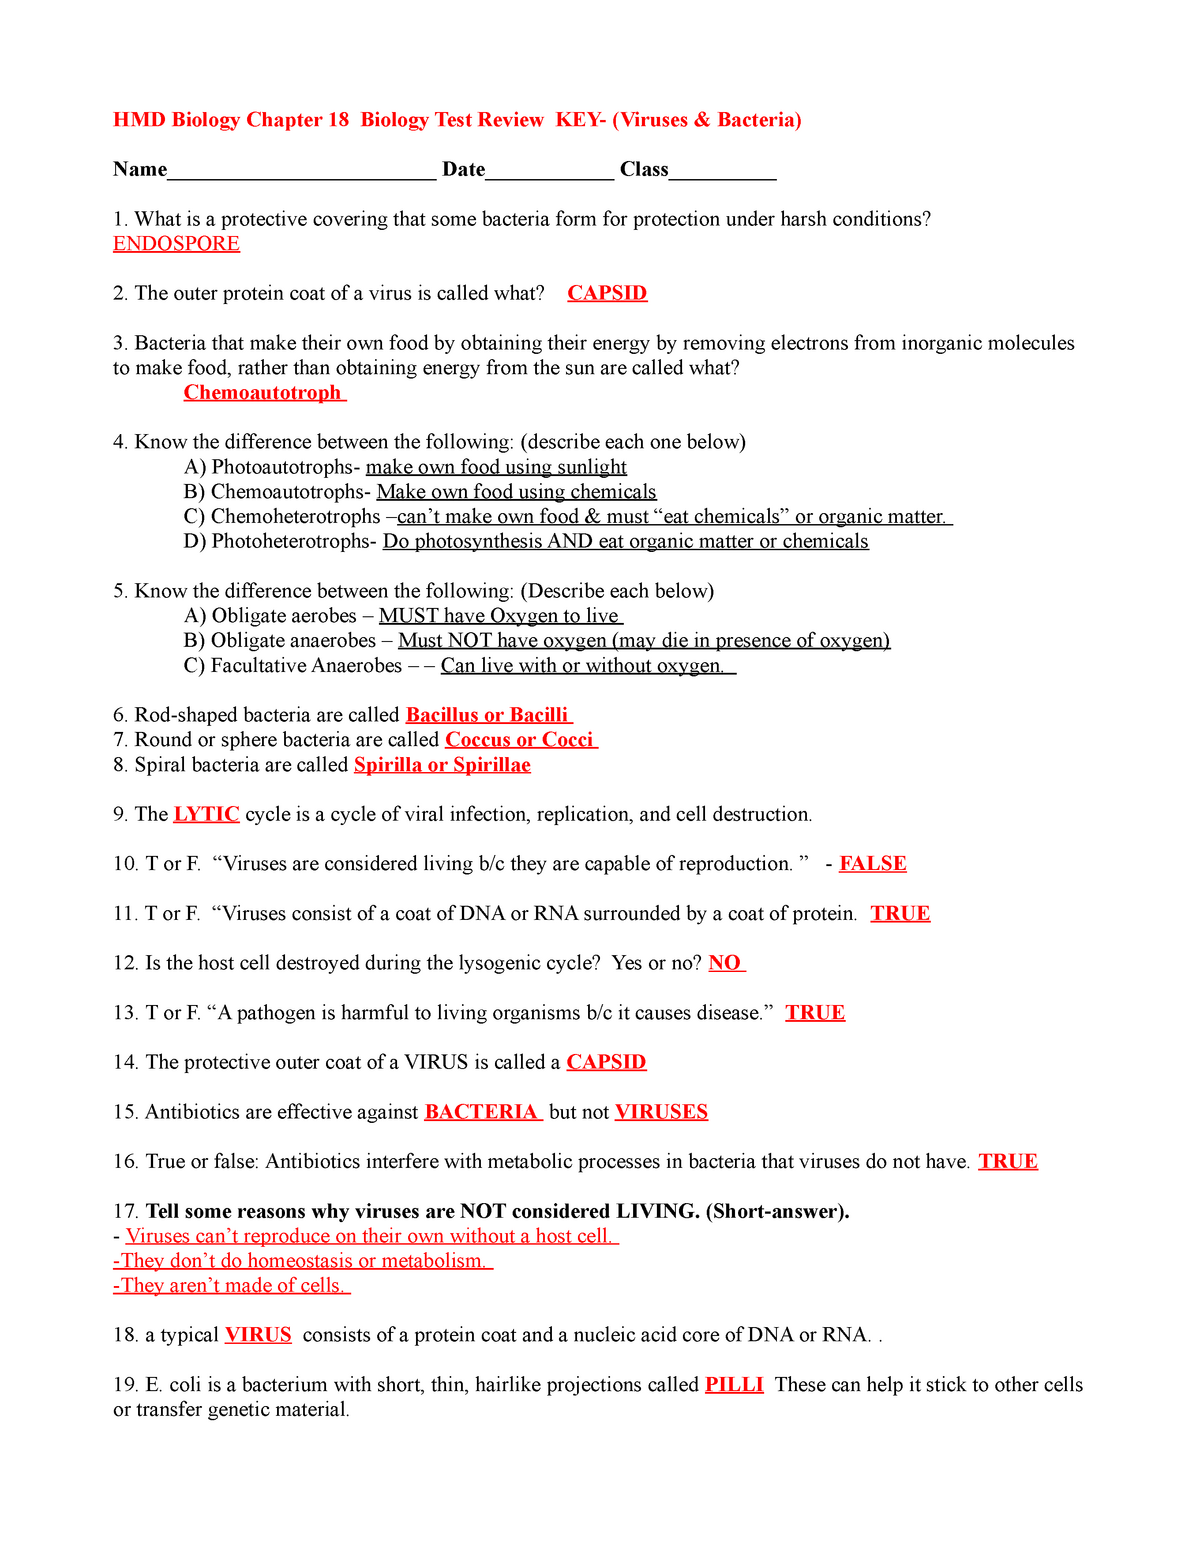 HMD Ch 21 Bio Test Review KEY - HMD Biology Chapter 21 Biology With Virus And Bacteria Worksheet Answers